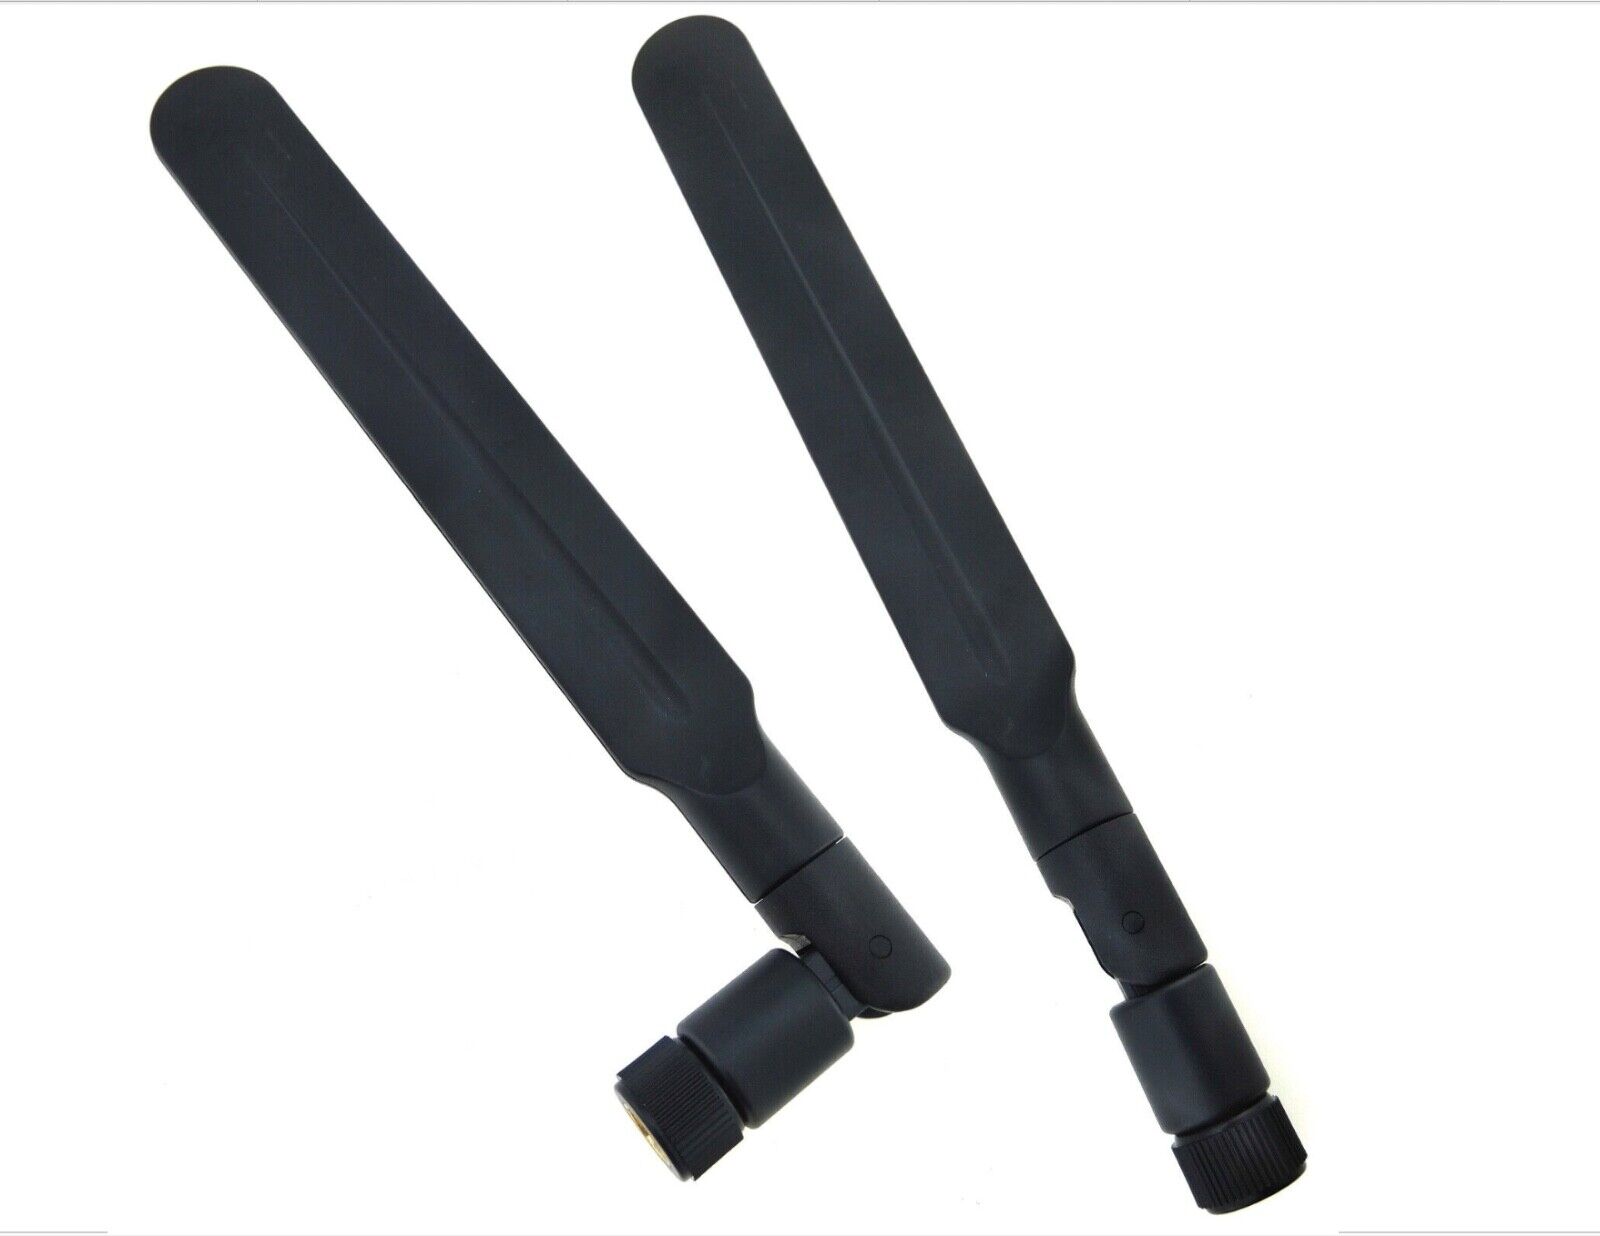 2 pack 8dBi WiFi Router Wireless Antenna 2.4GHz 5GHz 3G RP-SMA Omni Directional